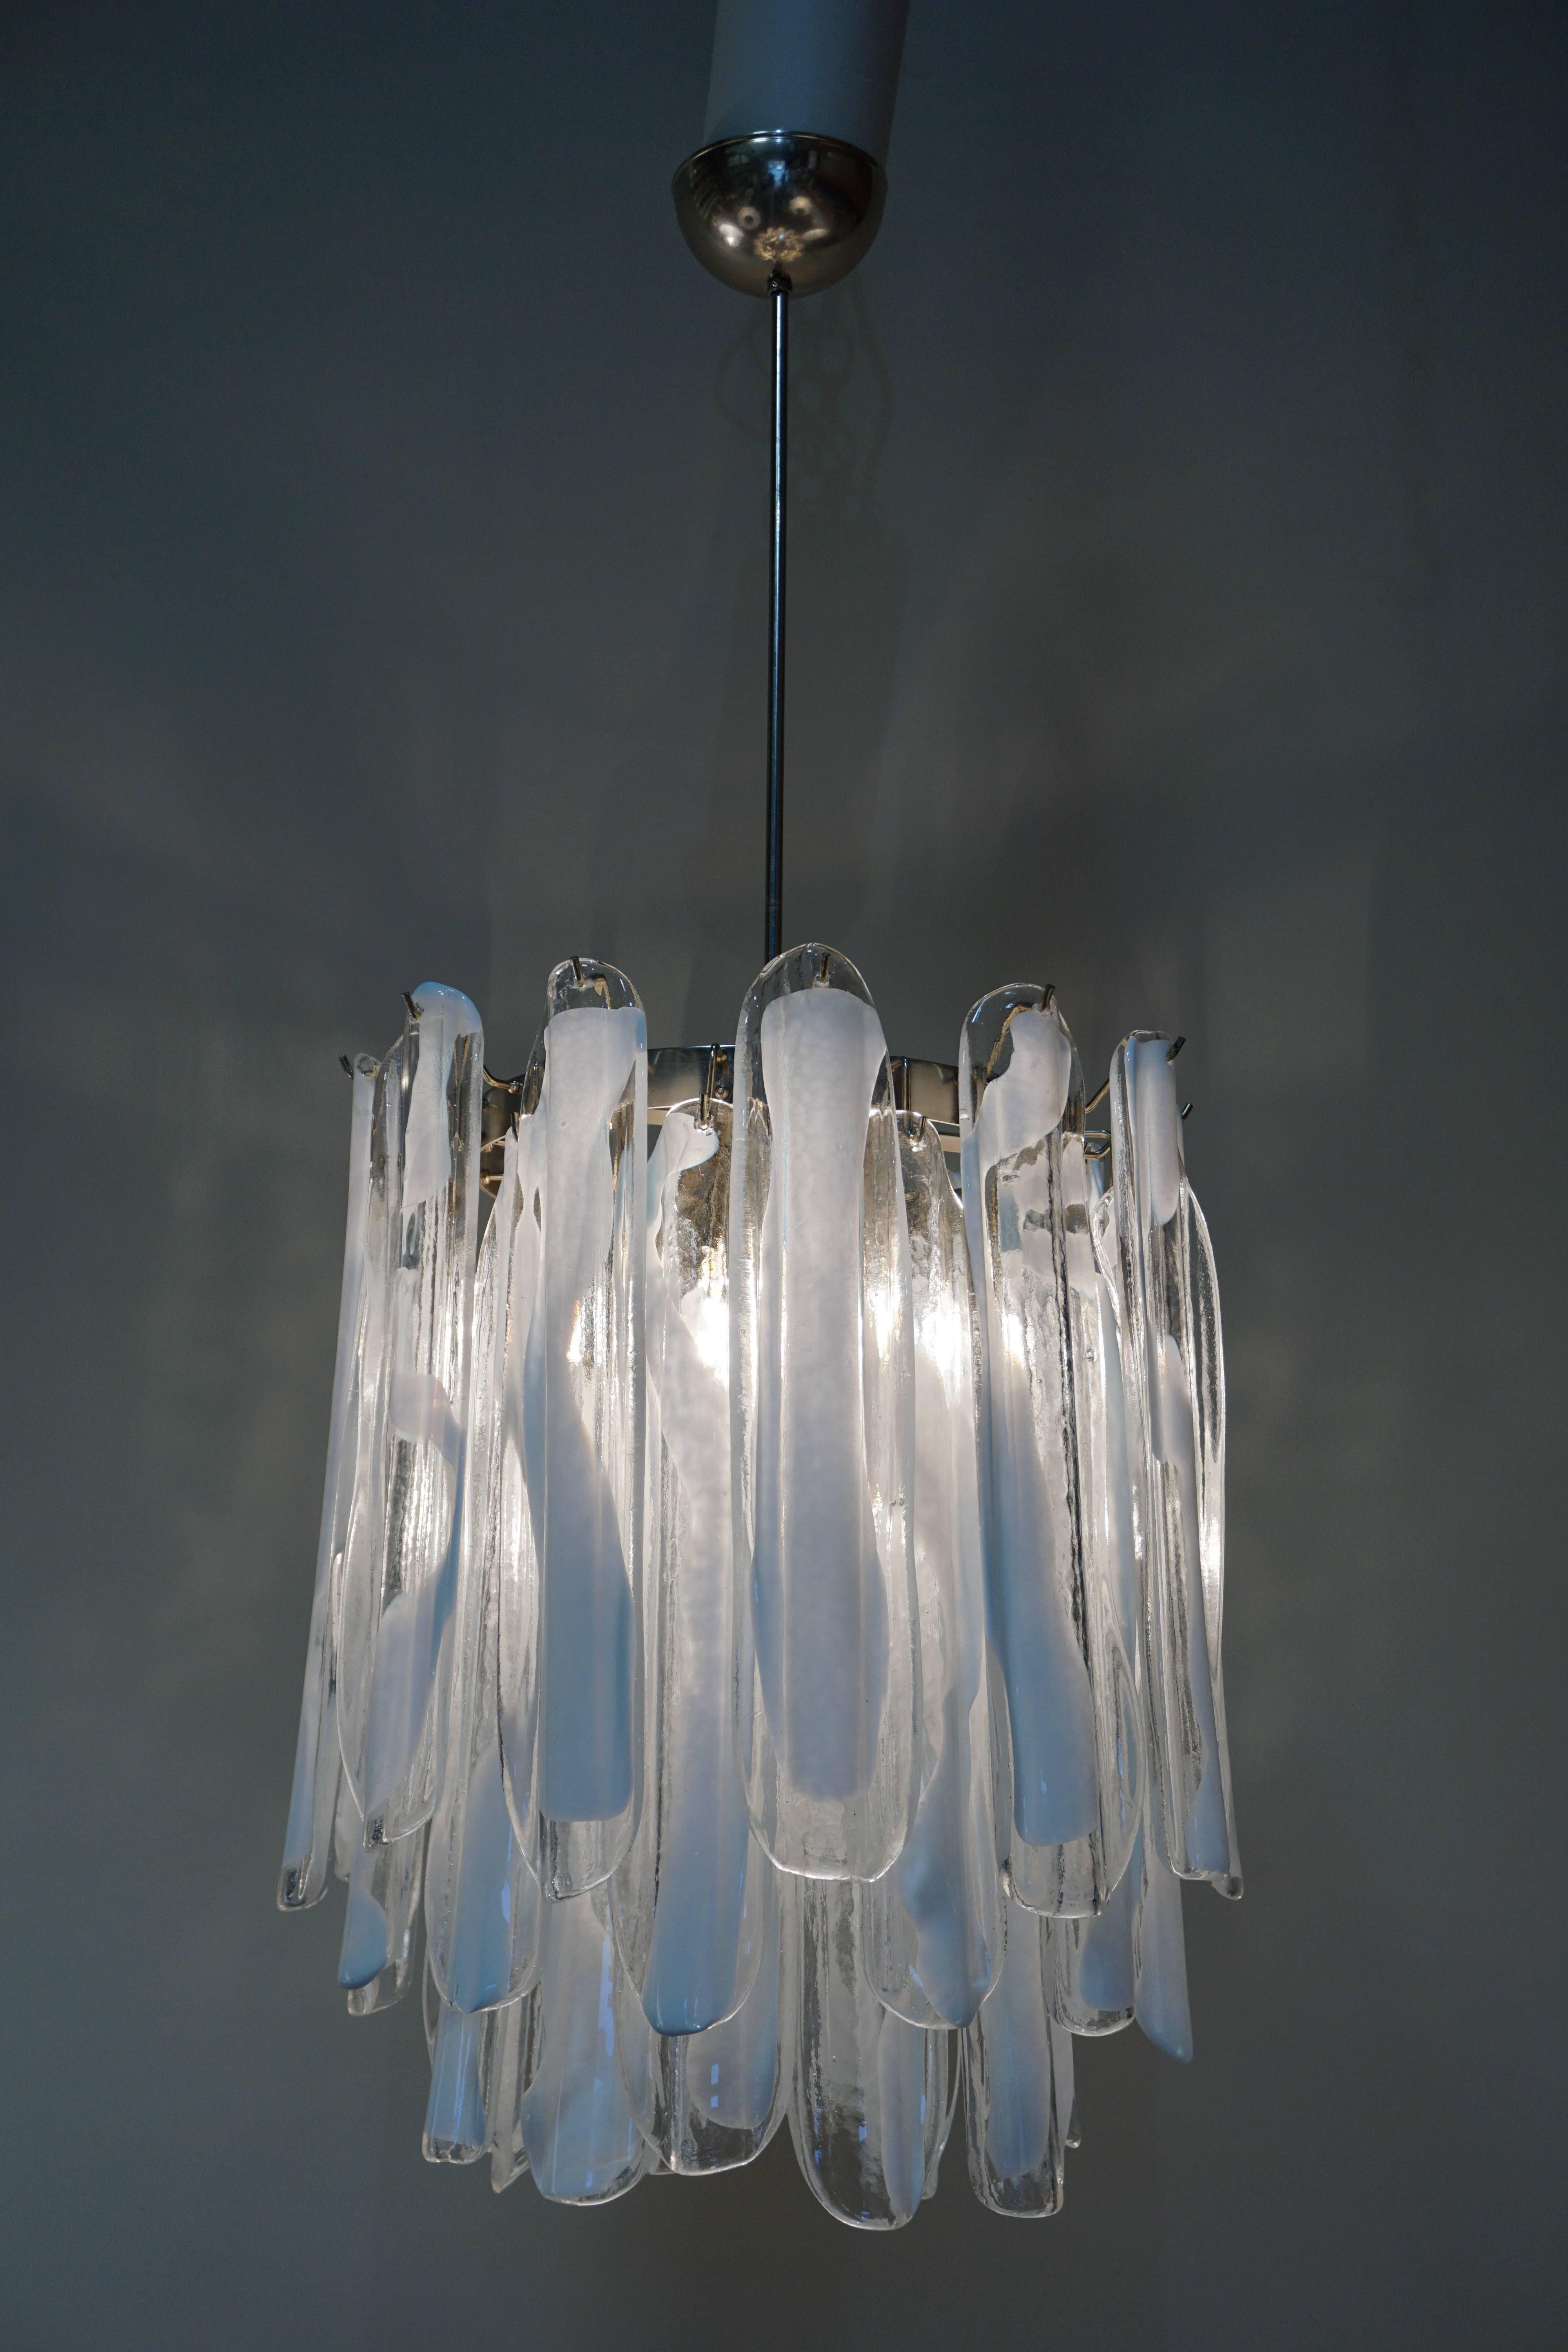 Handblown textured glass in clear and white by Mazzega.
Total height is 43' but the rod can be cut and the minimum height fully installed can be 30